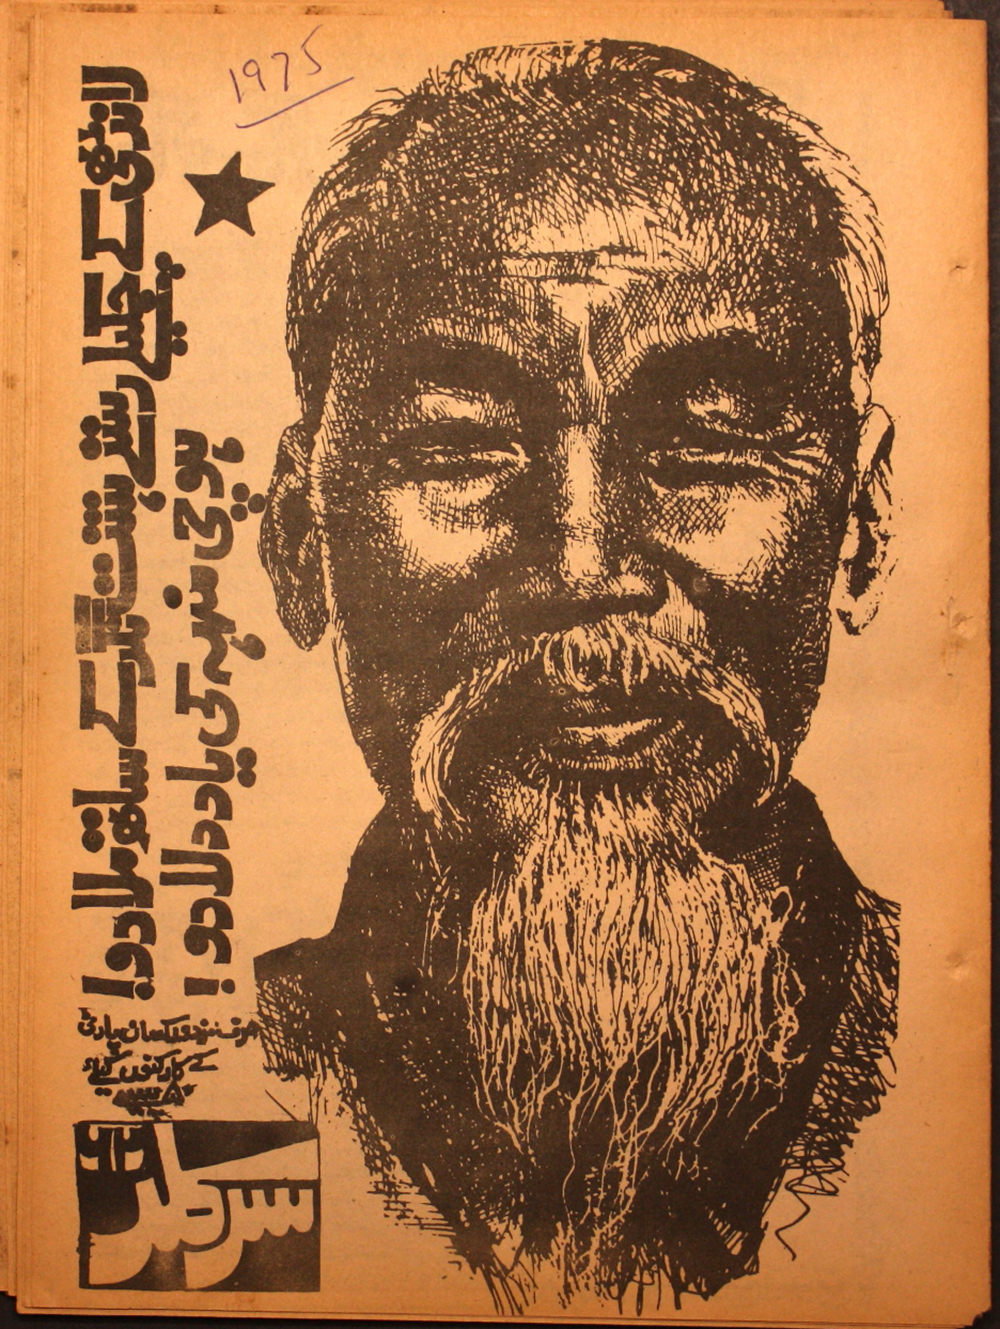 The cover for an issue of the MKP’s internal circular signals the party’s vernaculardriven universalism. The sketch is of Ho Chi Minh and the text reads “Connect the shining paths of Landhi to Hashtnagar—Remind us of Ho Chi Minh.” Landhi is an industrial area in Karachi, where an explosive workers’ struggle occurred in the 1970s. Hashtnagar is a rural area in the former North-West Frontier Province and was the site of a major MKP-led peasant movement in the 1970s. Clipping from the MKP’s Circular, no. 62 (June 1975). Scanned by Noaman Ali.